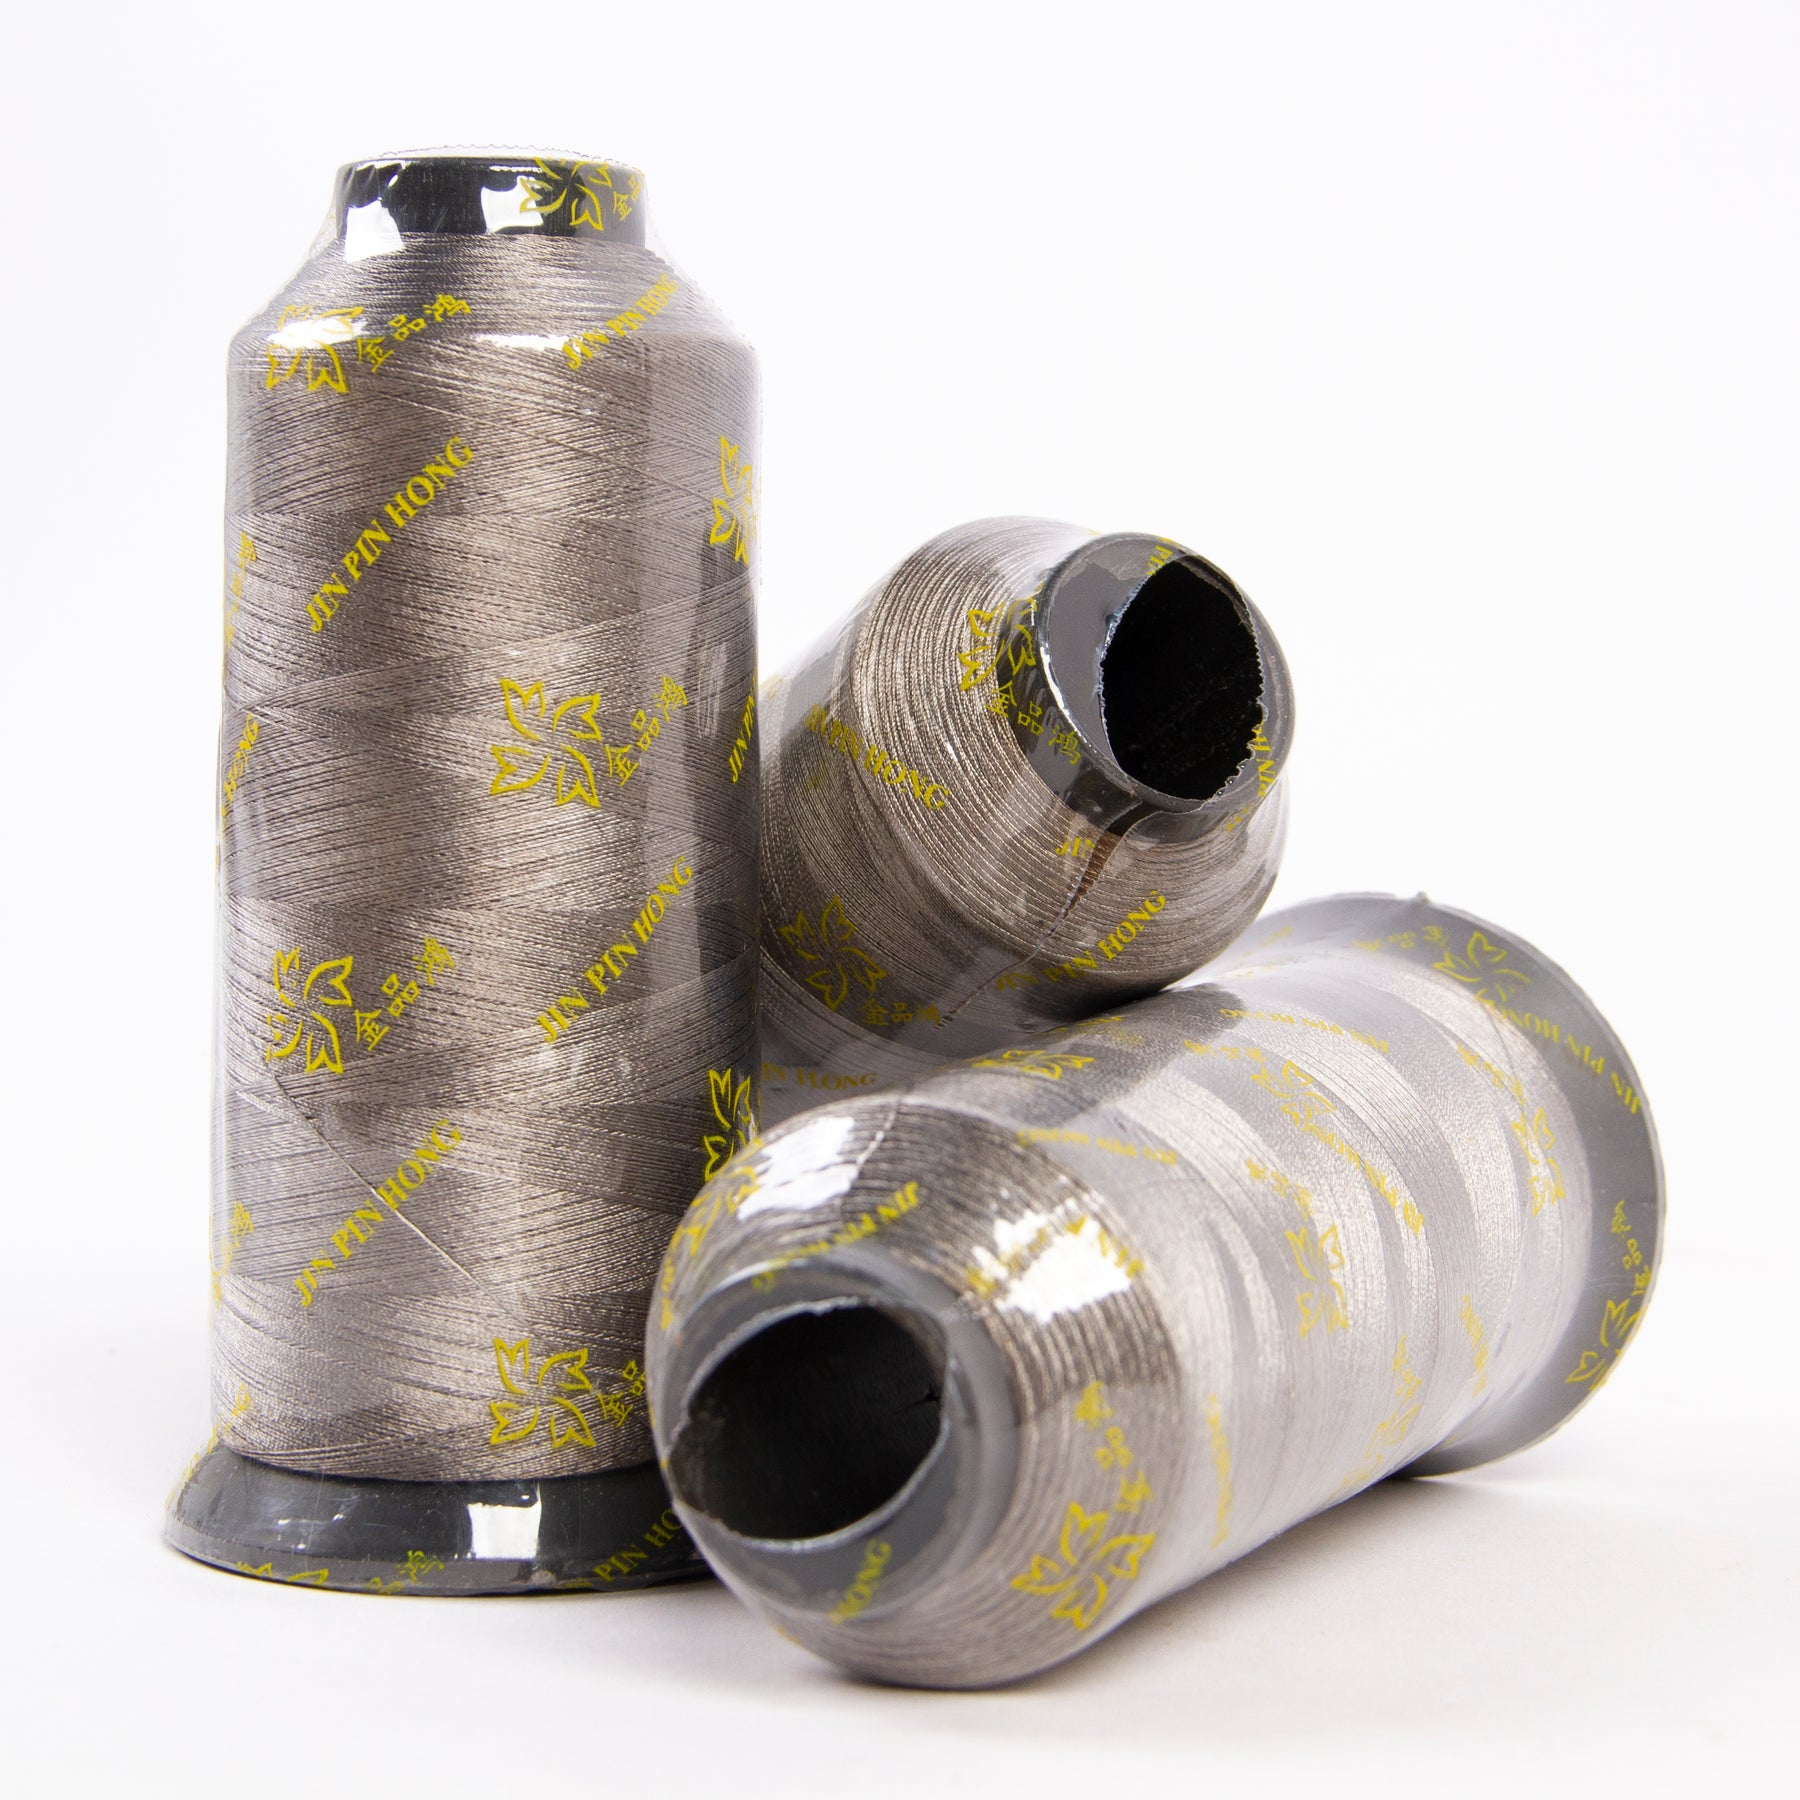 Silver Conductive threads are used for electric signal transfer